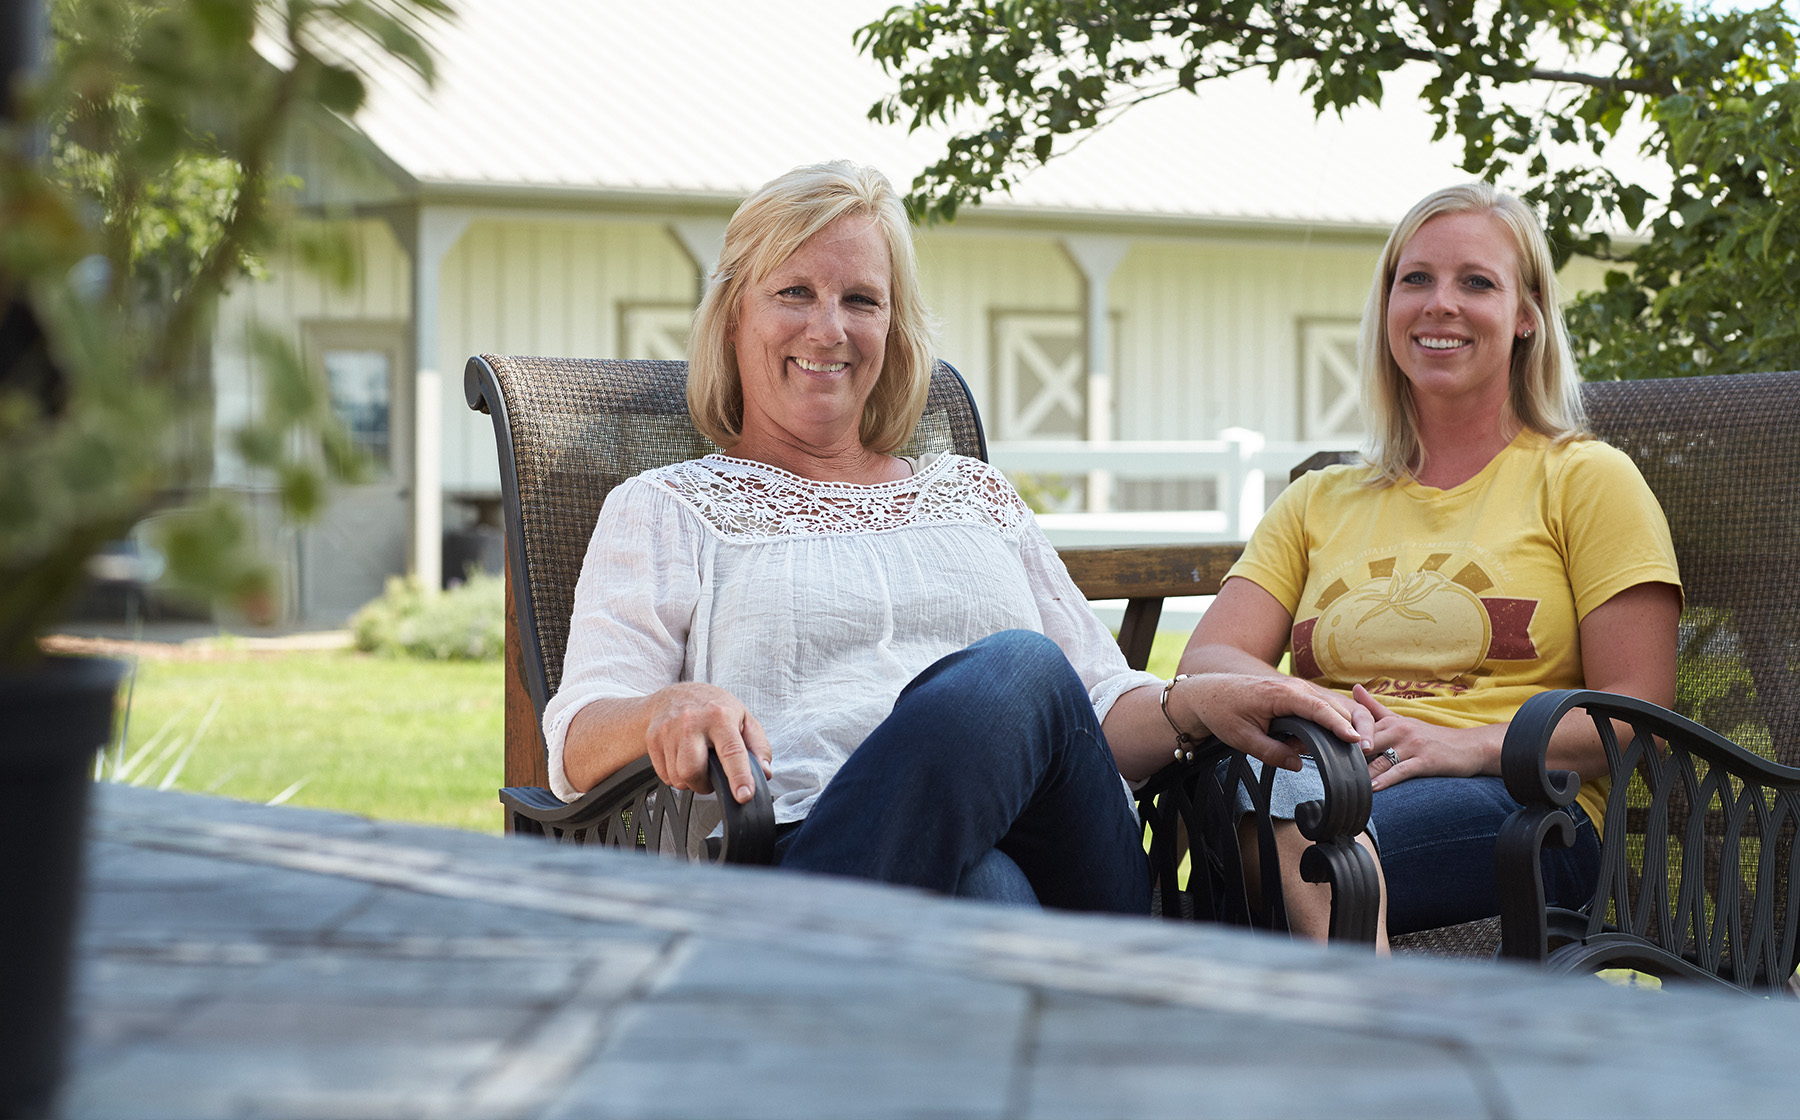 Image of Keesling Farms Growers for Red Gold Tomatoes Kim and daughter Kaycie in chairs outside with barn in background